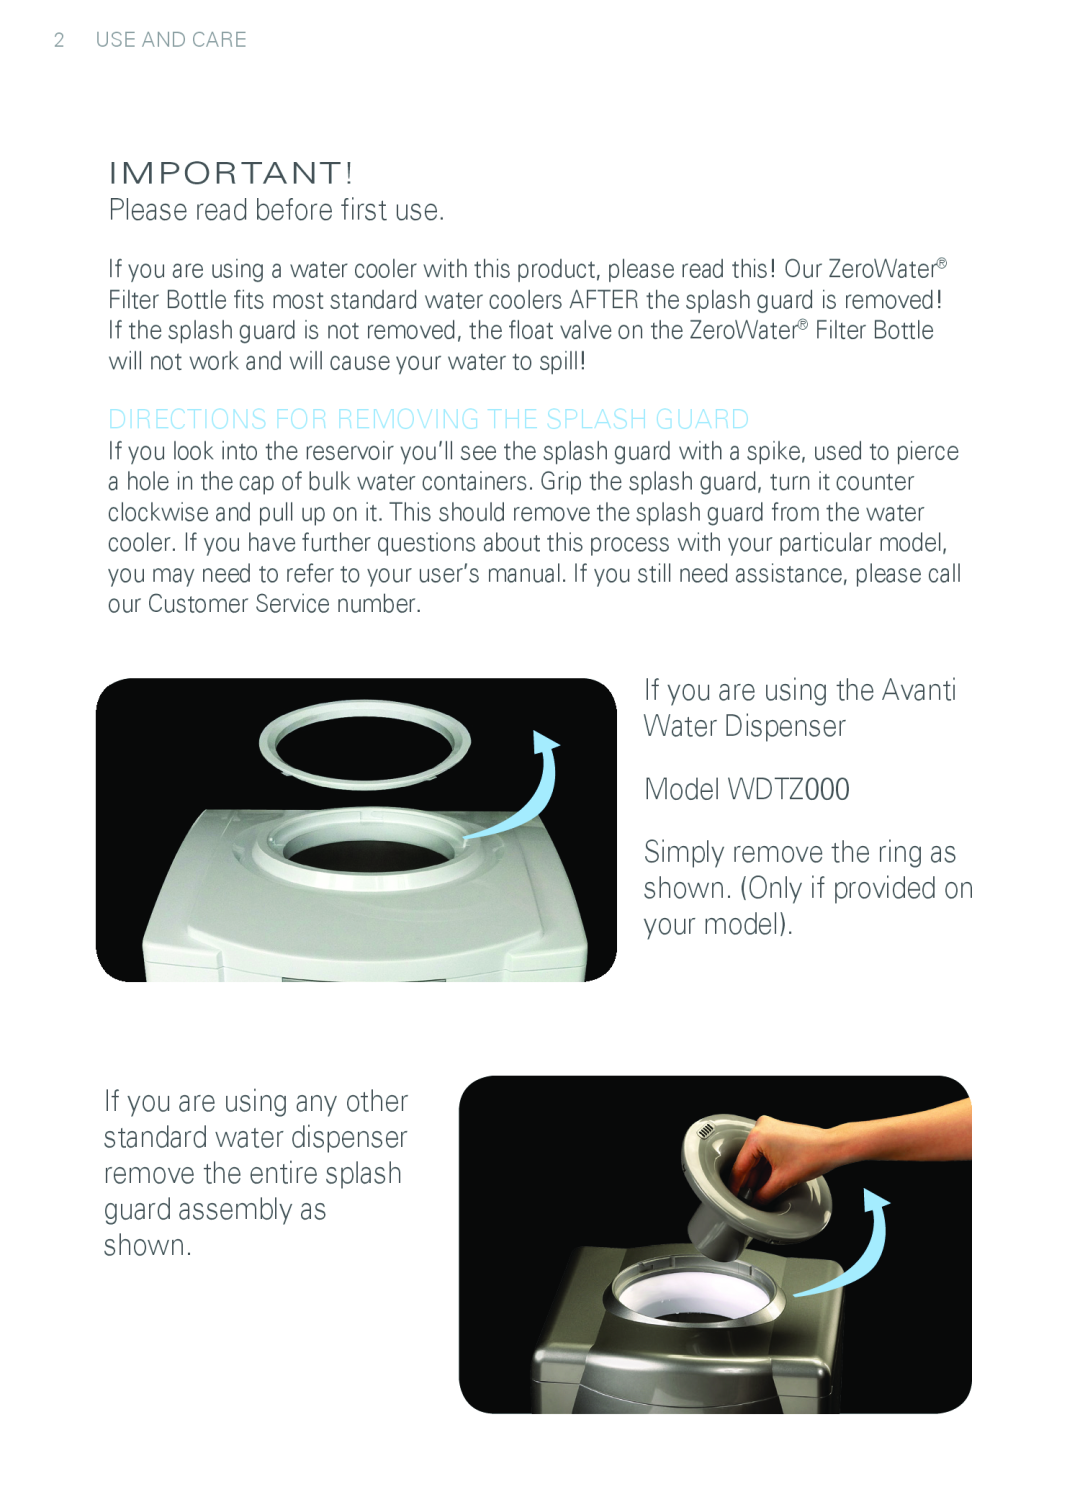 Avanti instruction manual Please read before first use, If you are using the Avanti Water Dispenser Model WDTZ000 